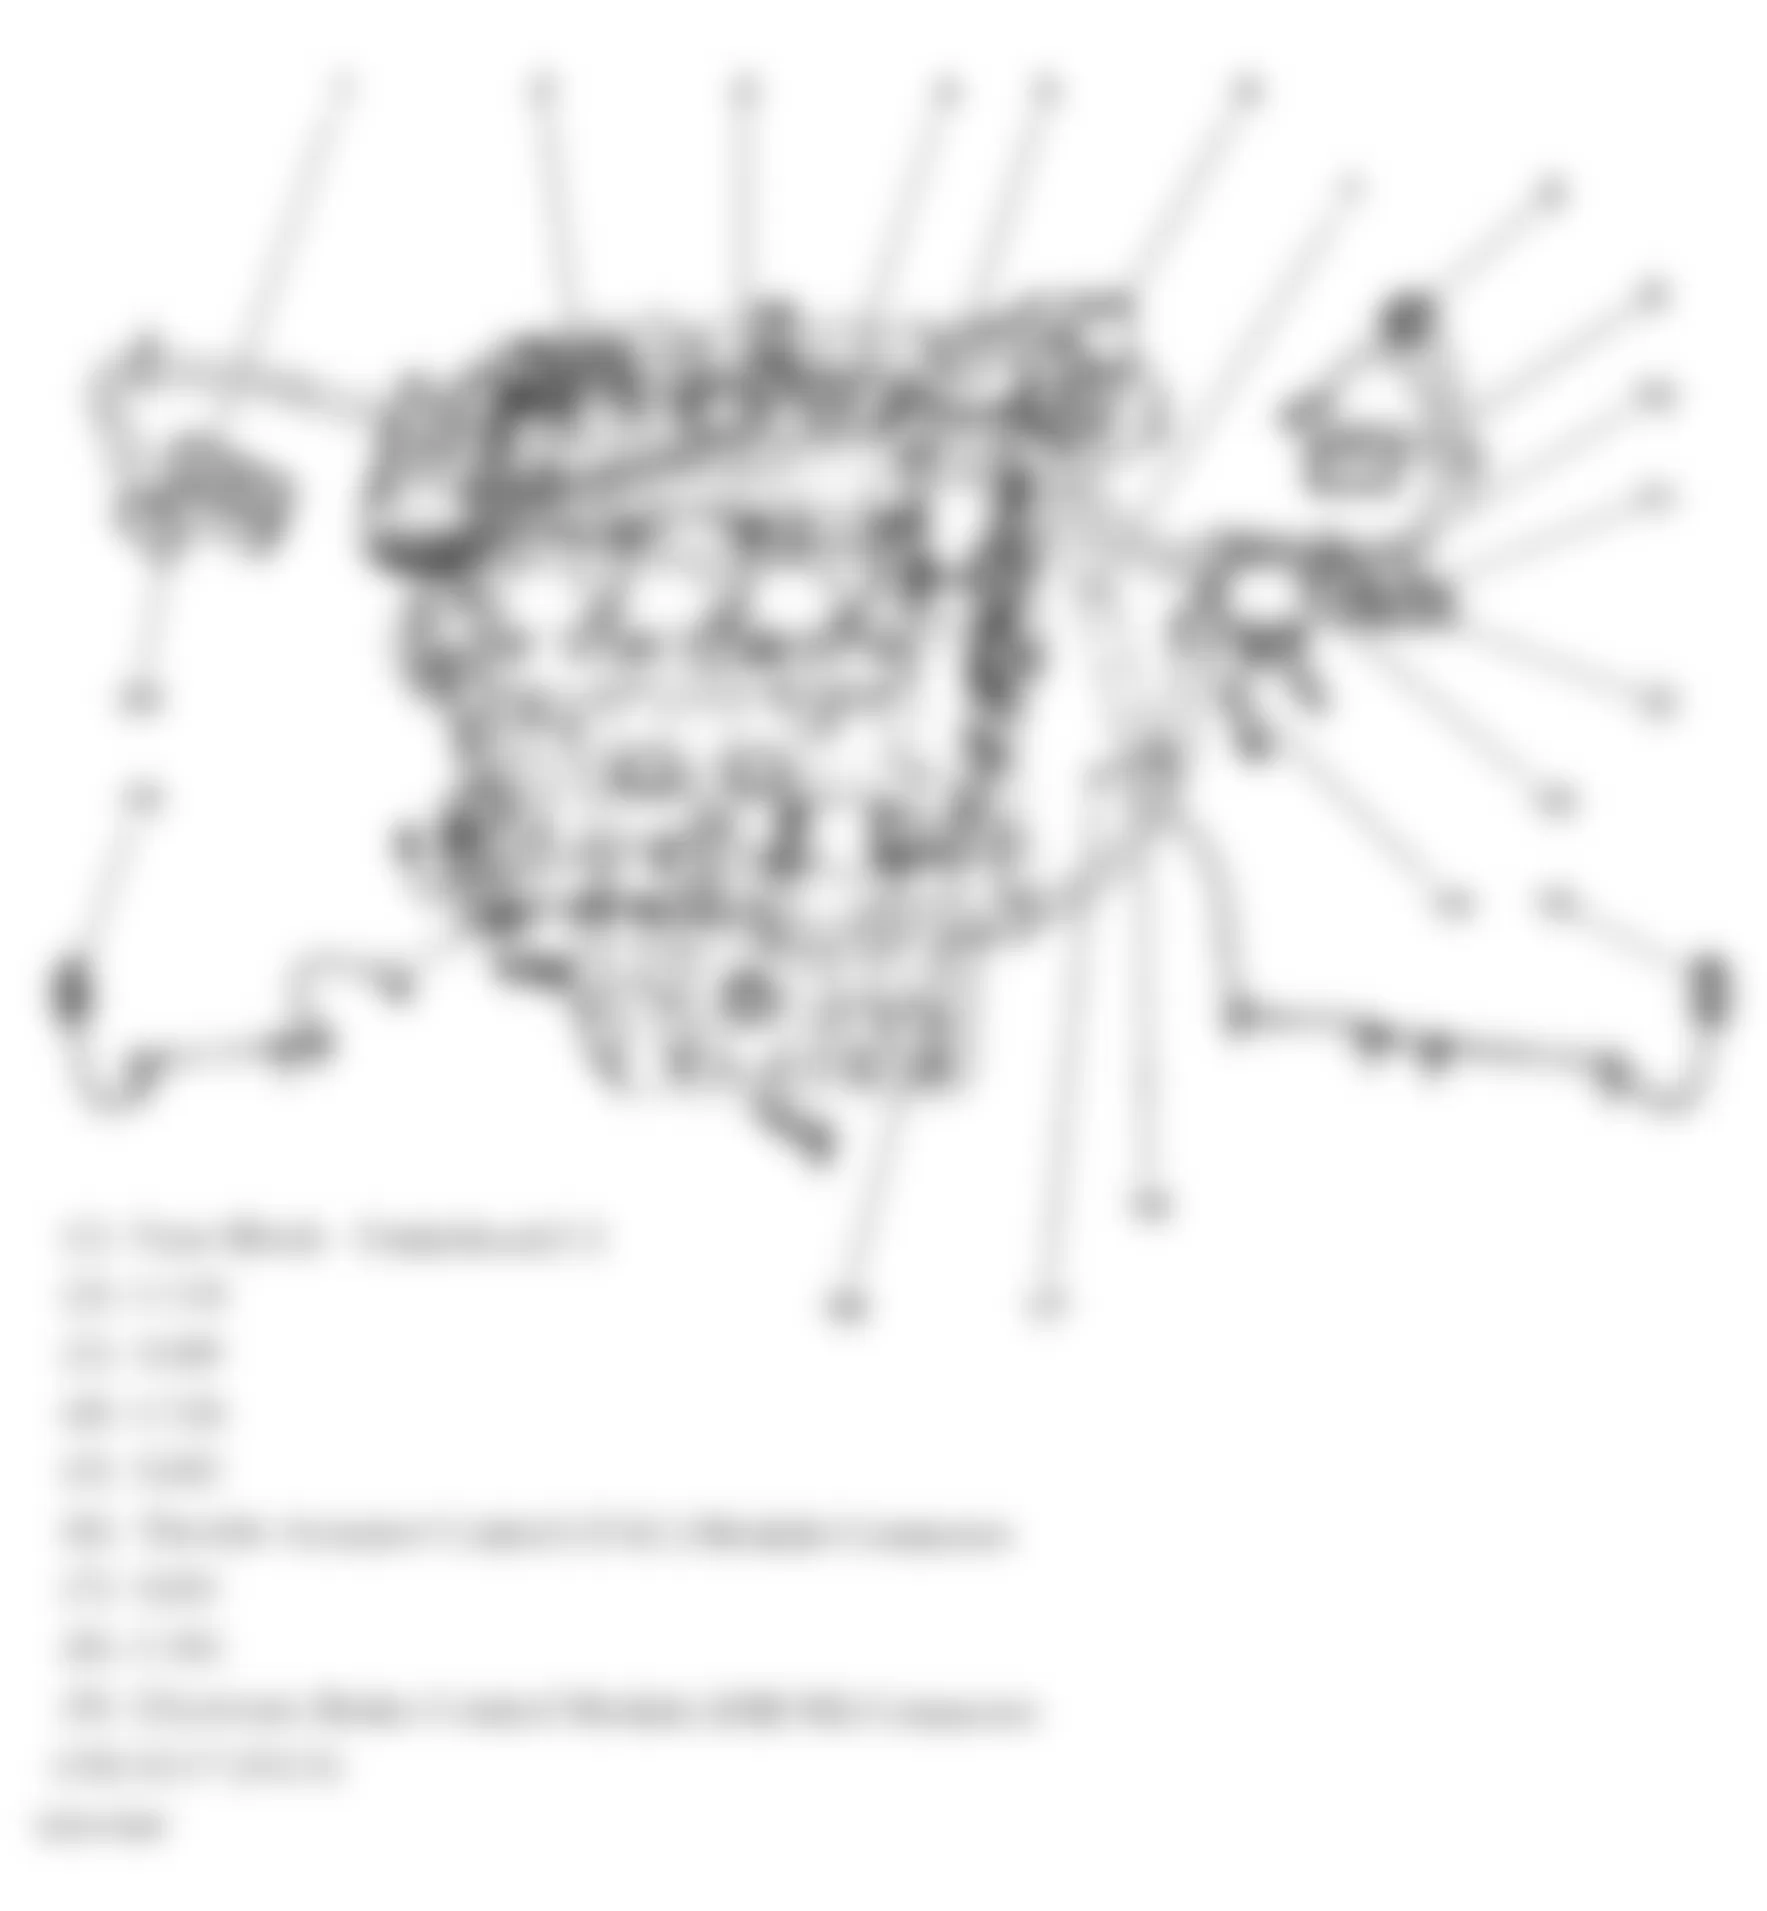 Buick LaCrosse CXL 2007 - Component Locations -  Left Side Of Engine (3.6L) (1 Of 2)